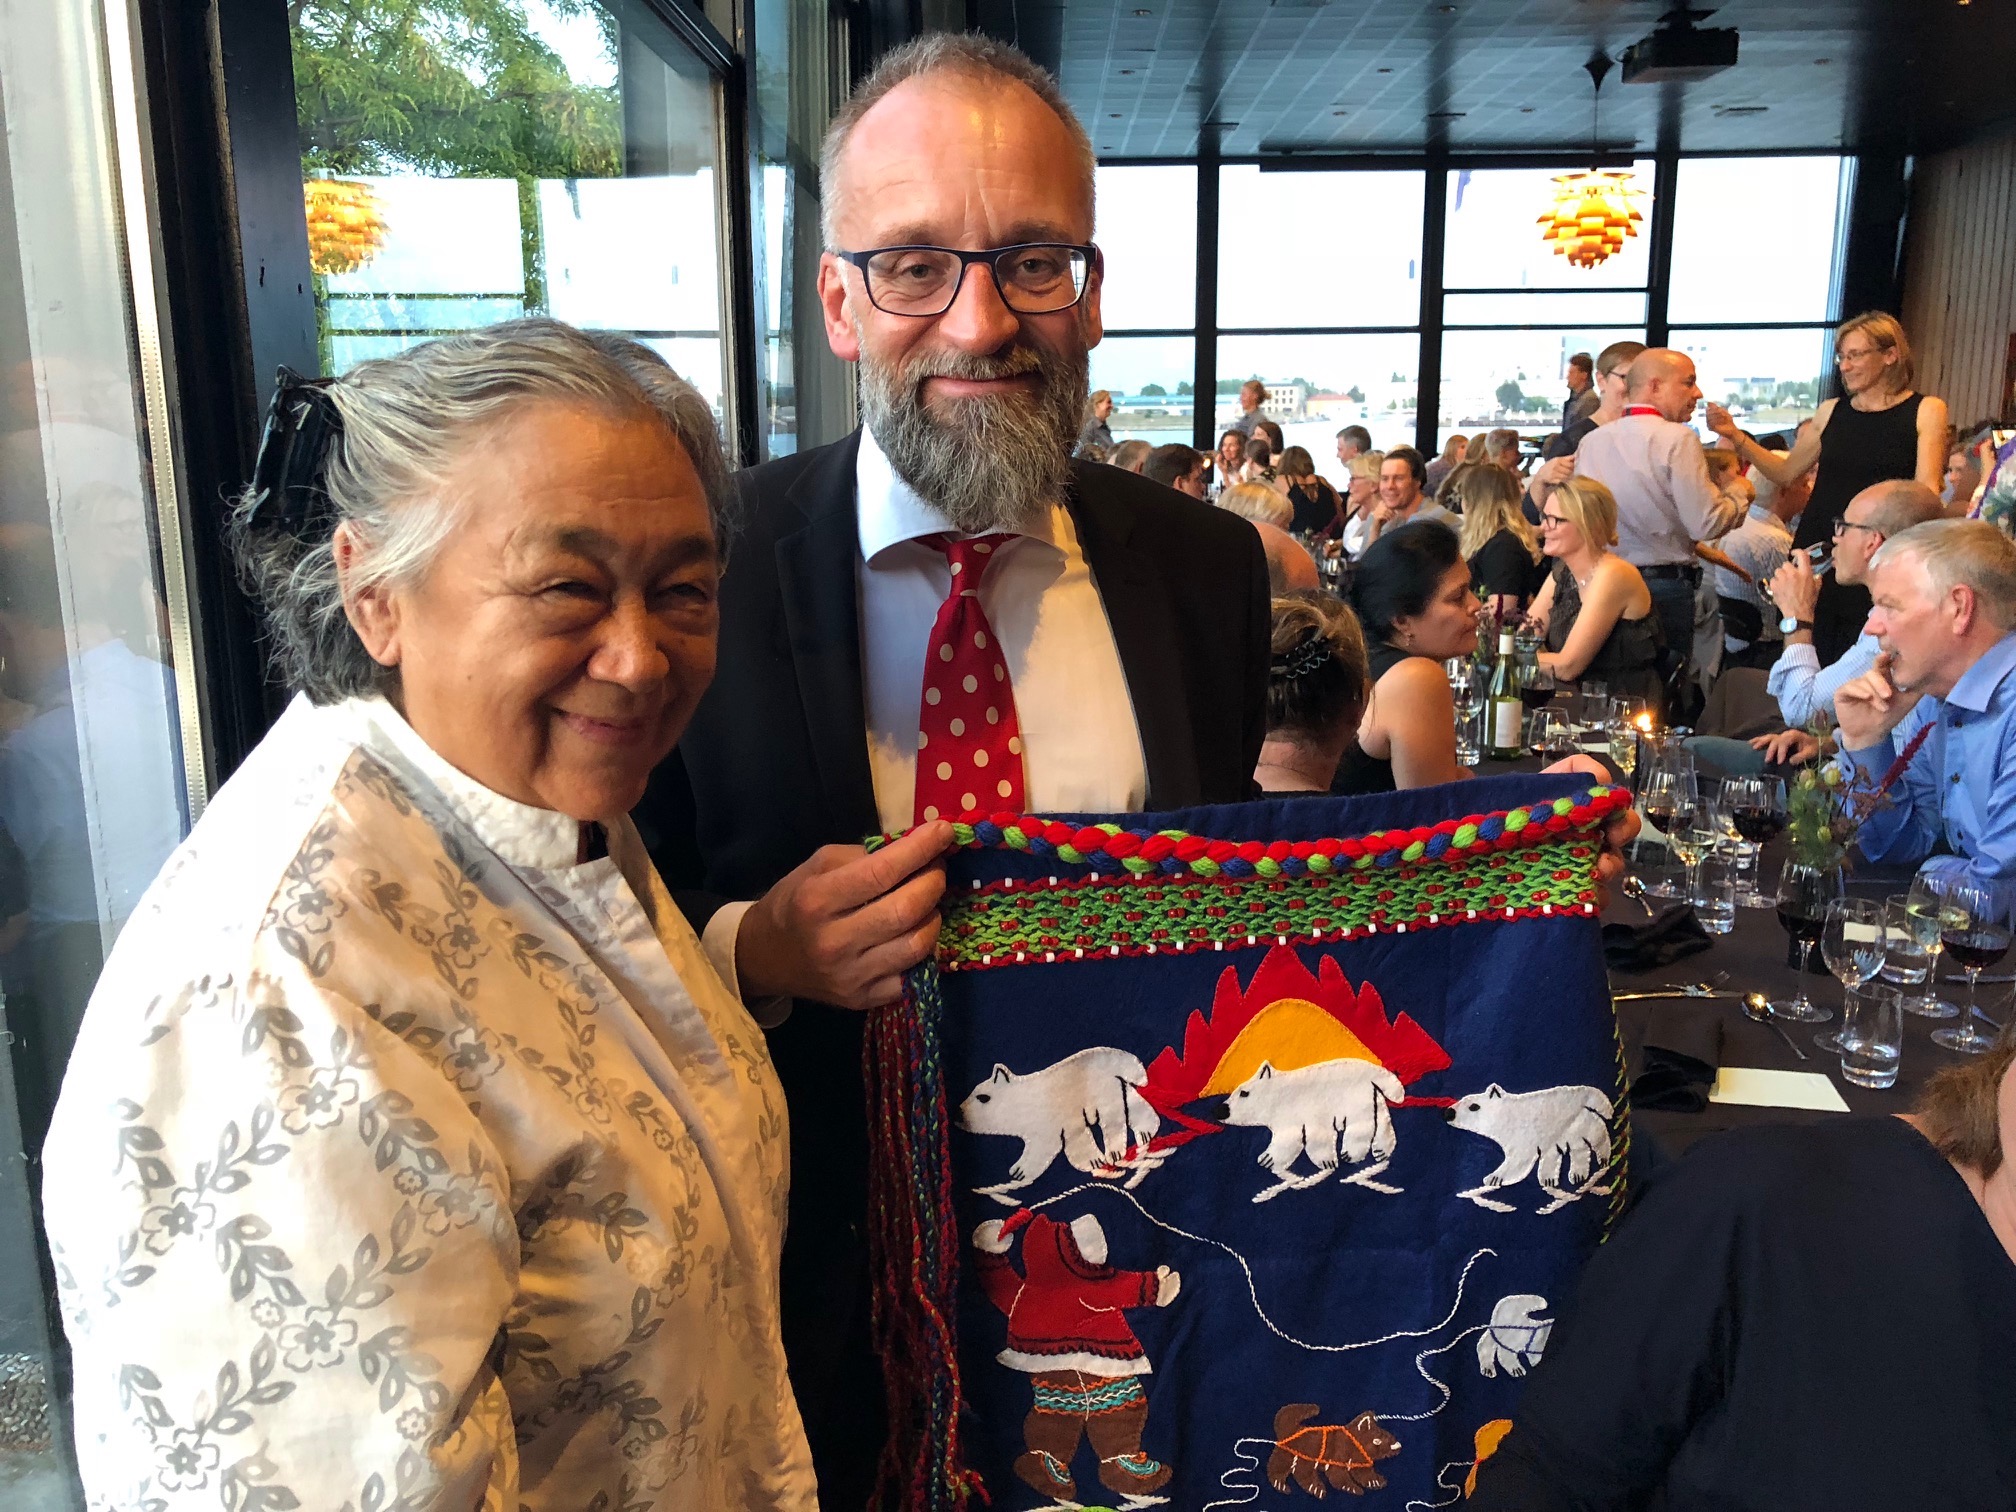 Levinia Brown of Rankin Inlet presents a wall hanging she made to Dr. Anders Koch, the organizer of the International Congress on Circumpolar Health in Copenhagen on Aug. 15. Brown, who is a former Nunavut health minister, was a keynote speaker at the conference where she spoke about changes in Inuit Nunangat from 1940 to today. “There were no doctors and nurses and Inuit looked after each other,” Brown said of those early years, noting that now Nunavut has its own nursing program. (PHOTO BY JANE GEORGE)